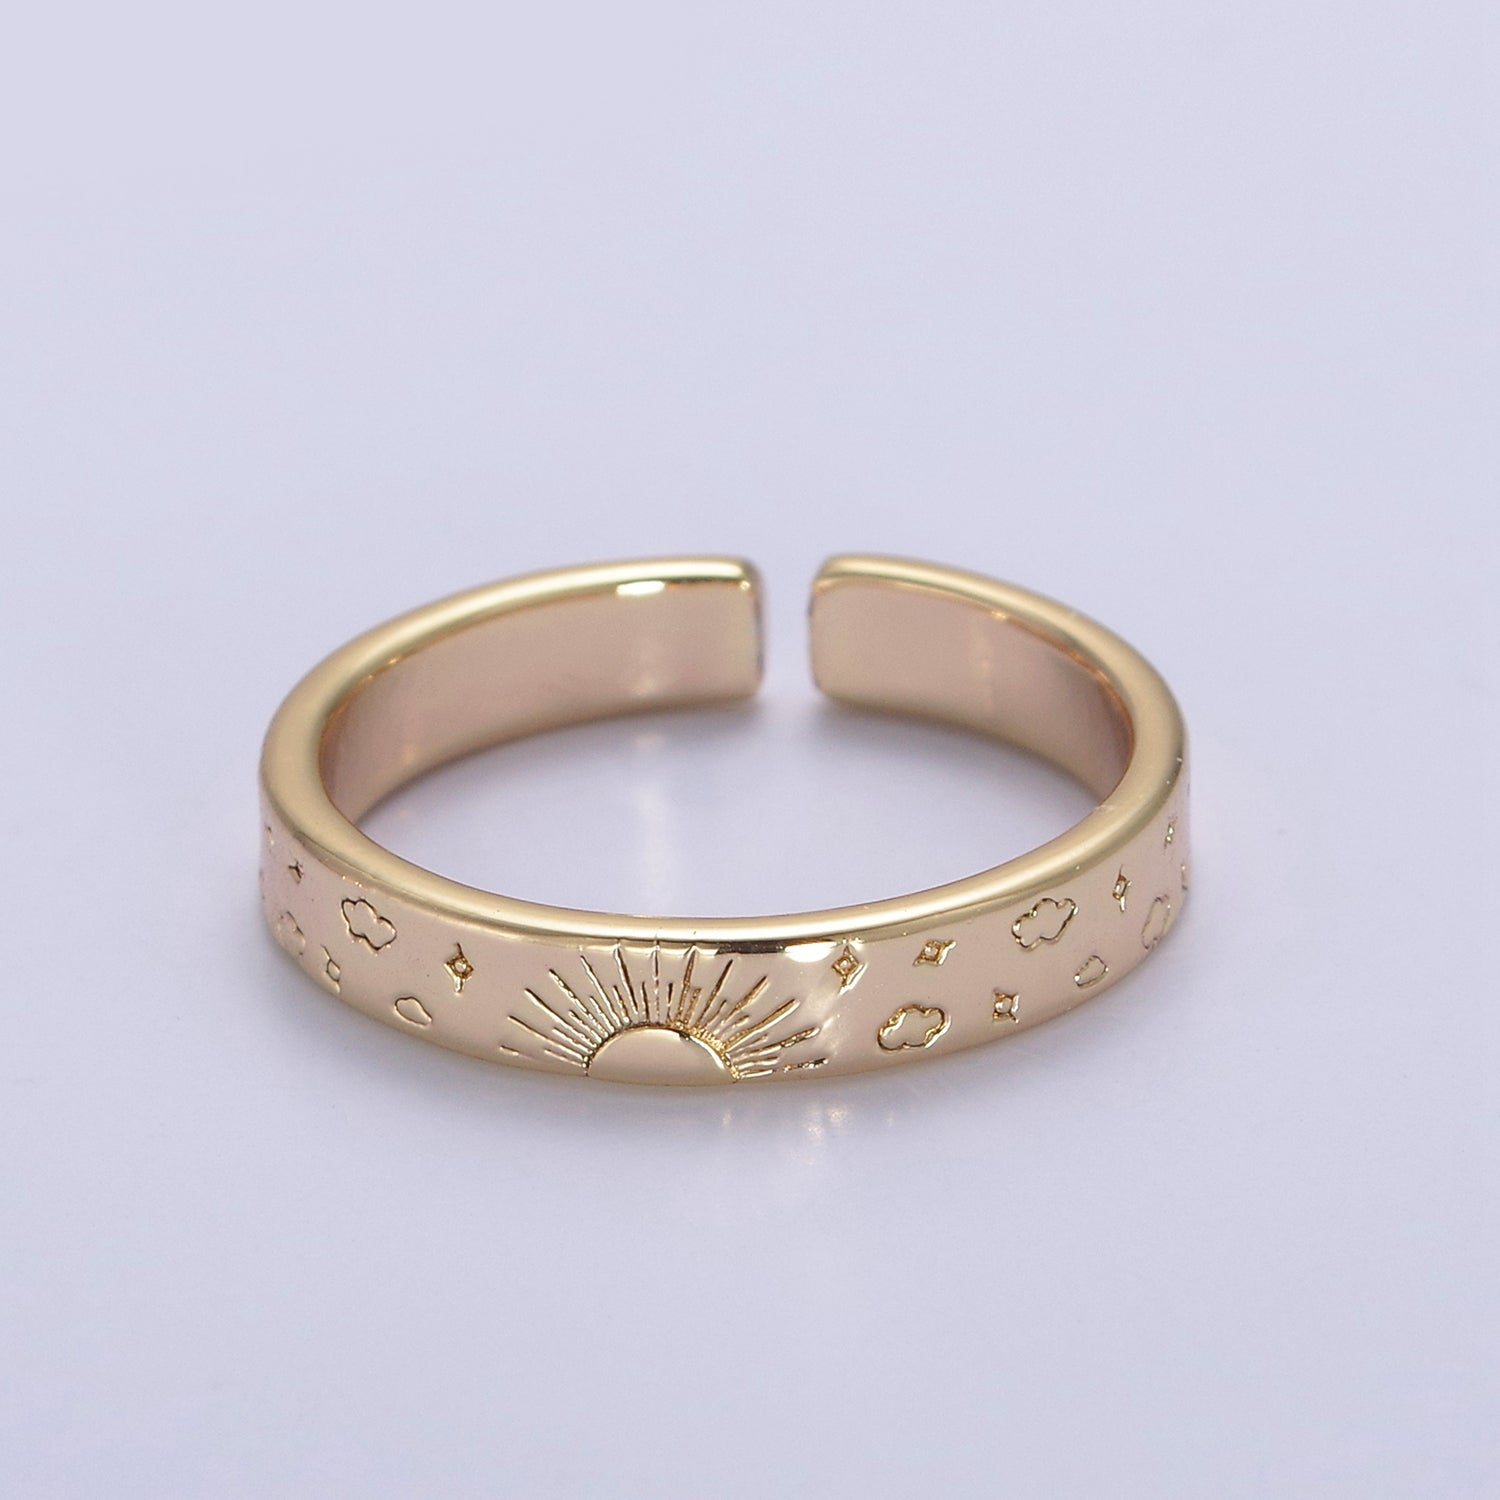 Gold Celestial Astronomy RING SET, Engraved Sun & Moon & Stars Gold Band Rings, 16K Gold Filled Adjustable Rings U442 - DLUXCA